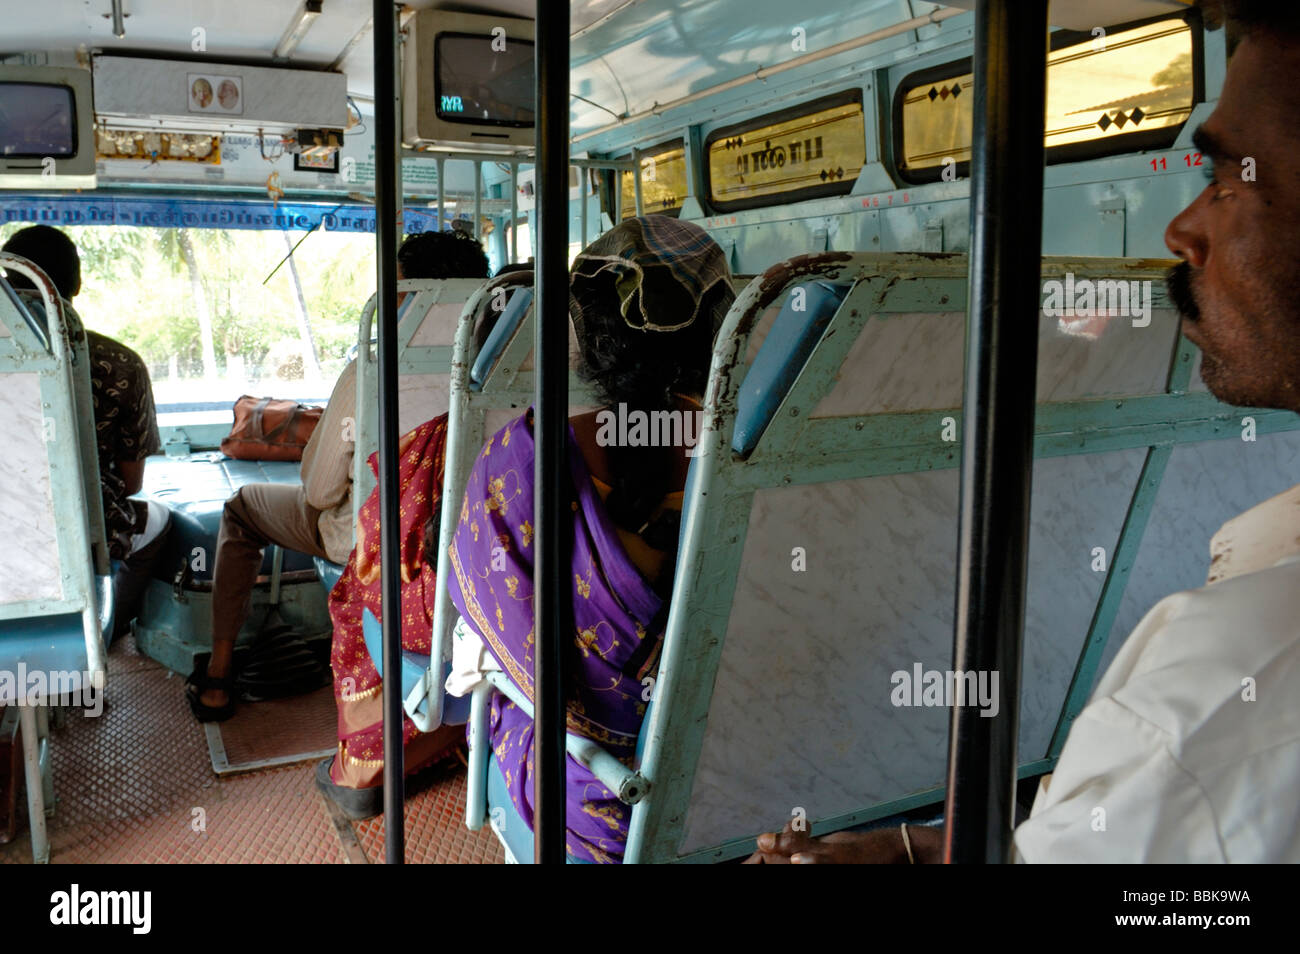 Travelling on a local bus in Chennai. India, Tamil Nadu, Chennai (Madras).  No releases available. Stock Photo